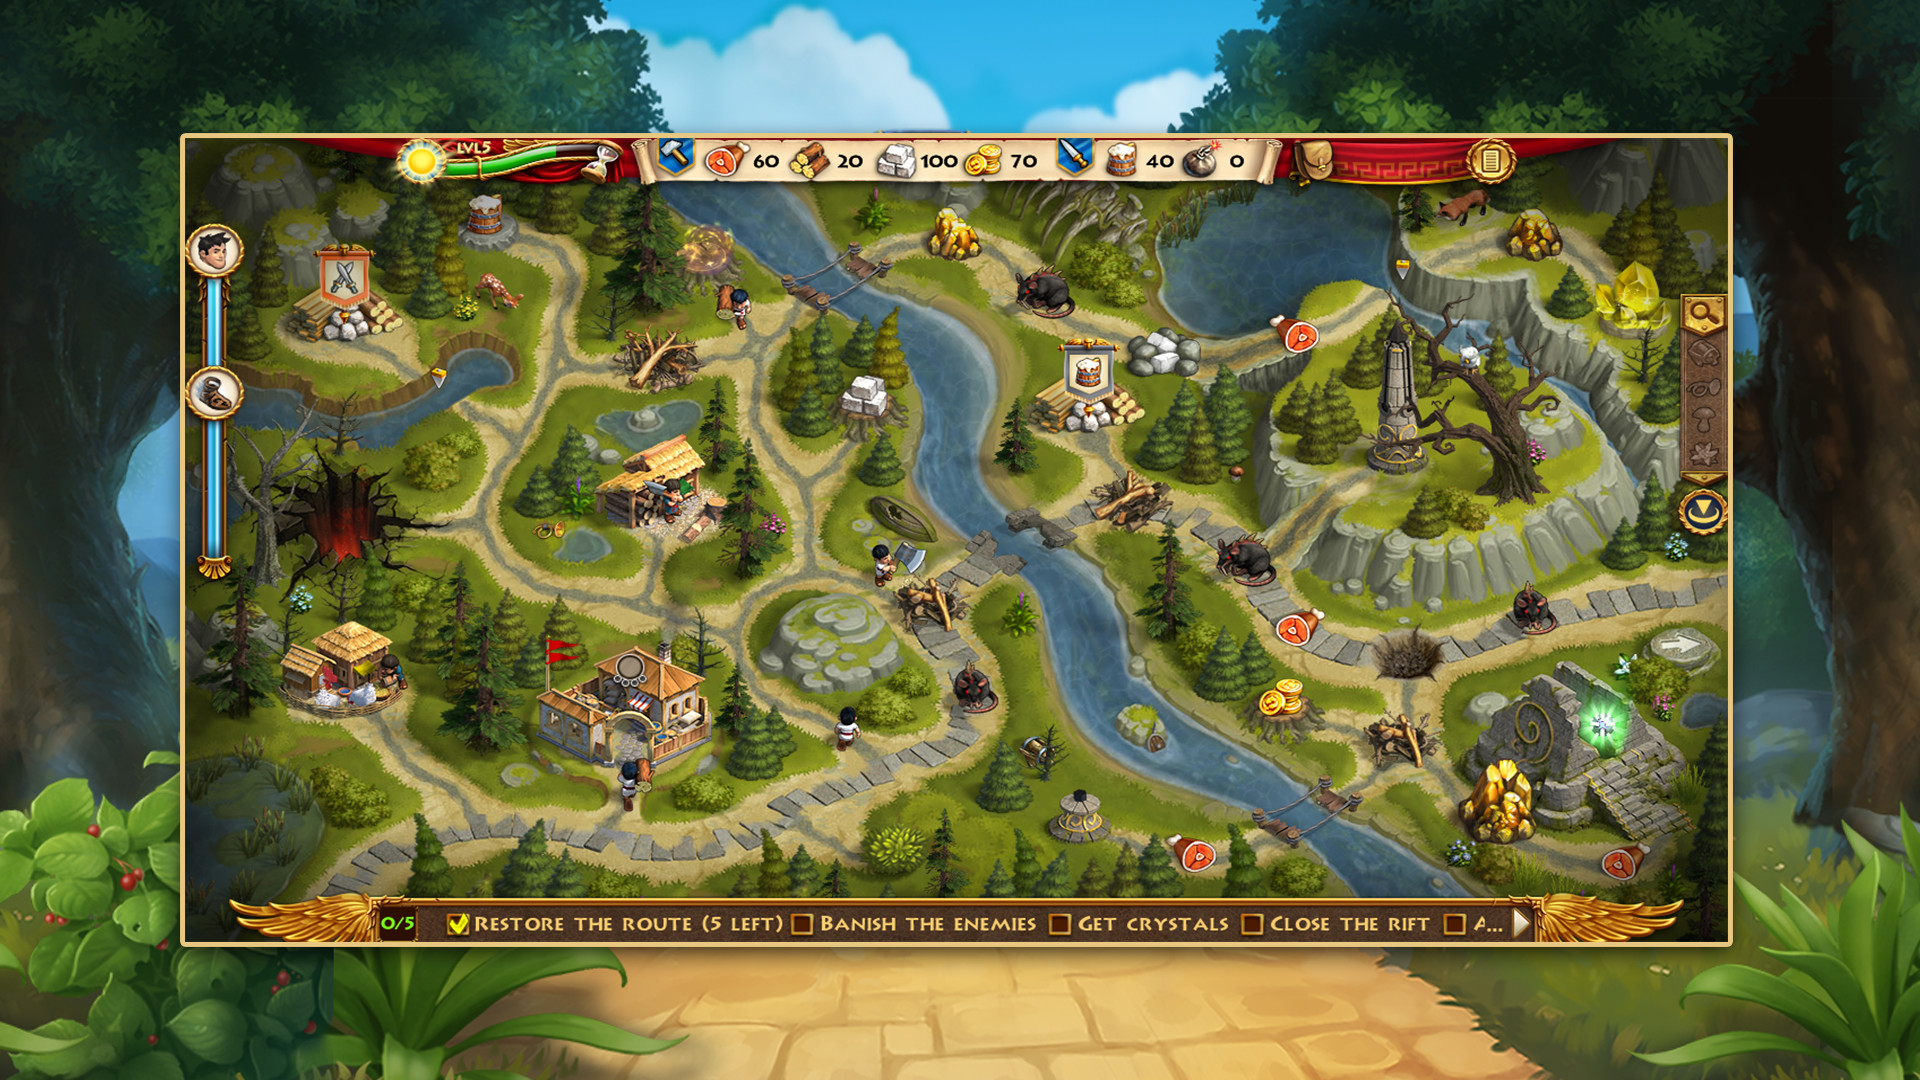 Roads Of Rome: Portals Collector's Edition Free Download